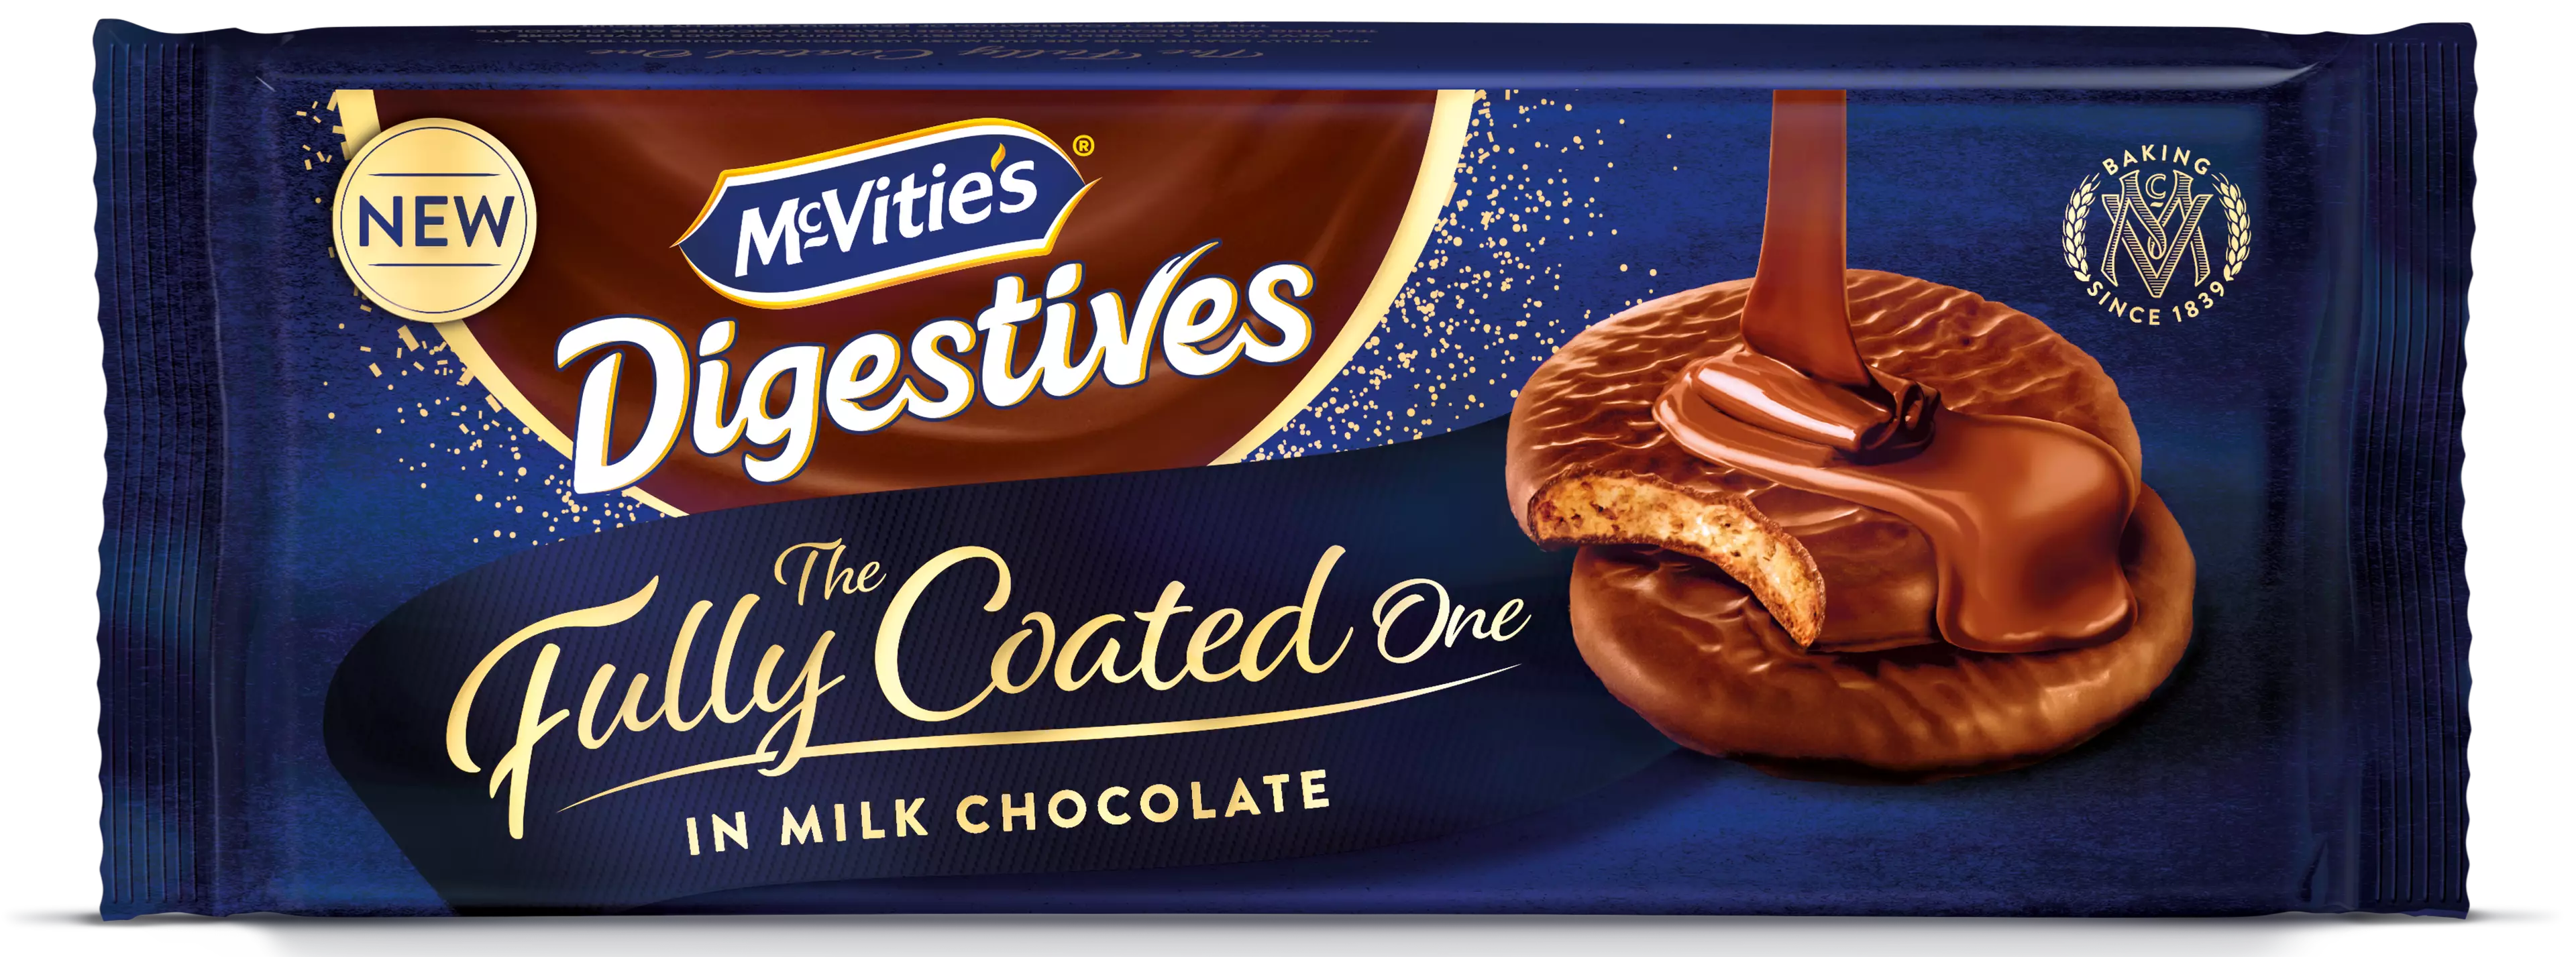 McVitie's is launching digestive biscuits coated in a thick layer of milk chocolate - on BOTH sides (